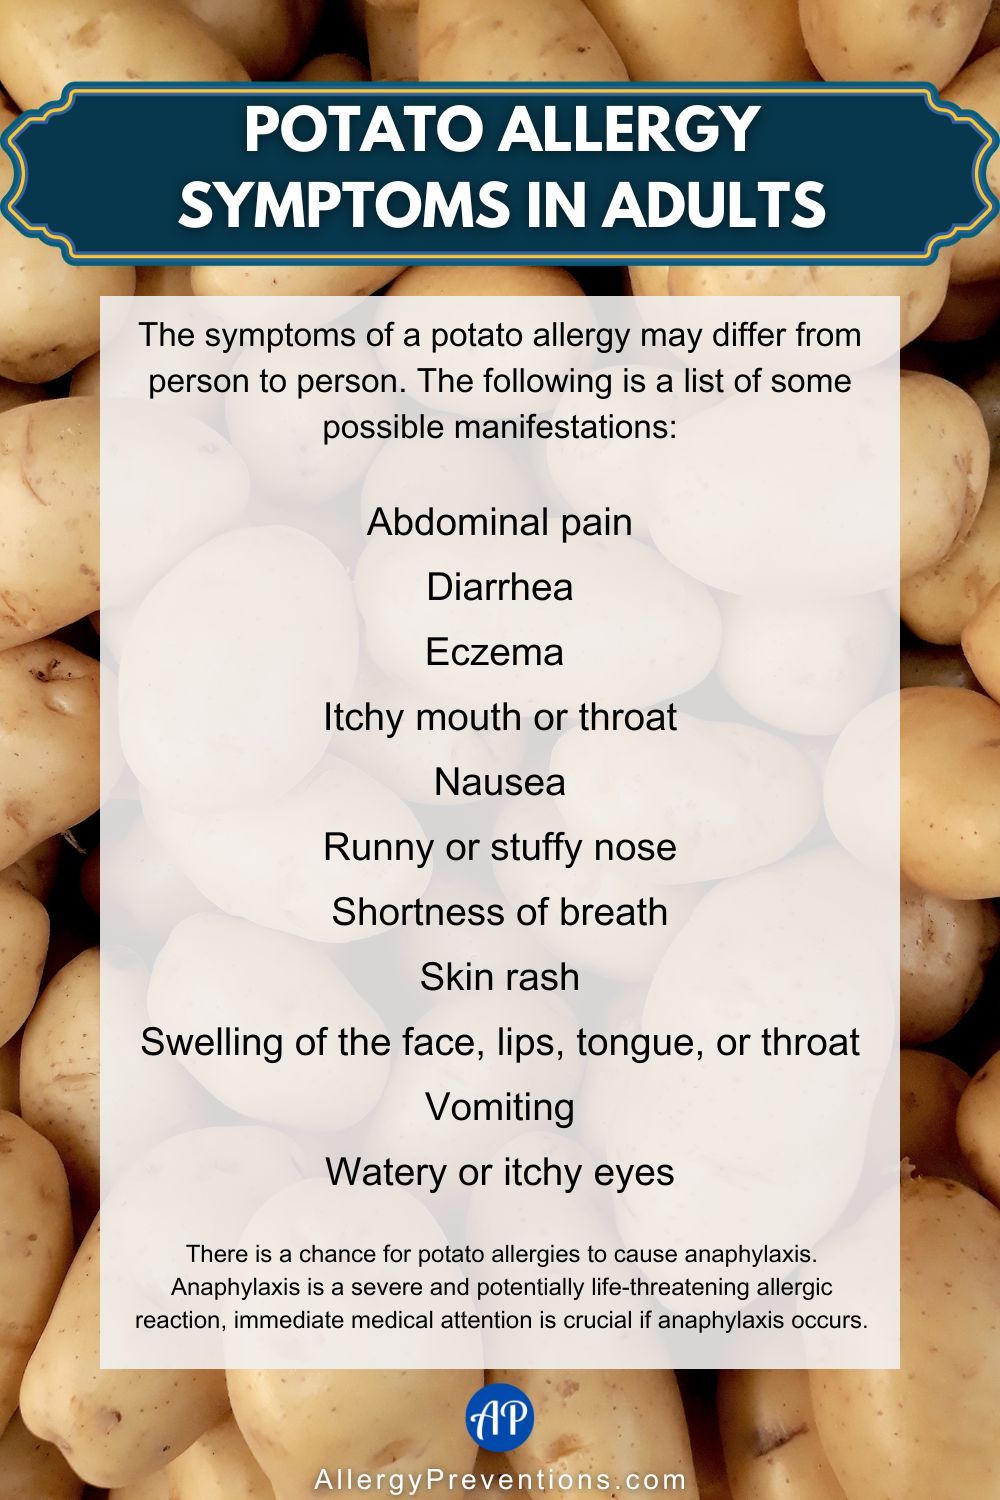 Potato allergy symptoms in adults infographic. The symptoms of a potato allergy may differ from person to person. The following is a list of some possible manifestations: Abdominal pain, Diarrhea, Eczema , Itchy mouth or throat, Nausea, Runny or stuffy nose, Shortness of breath, Skin rash, Swelling of the face, lips, tongue, or throat, Vomiting, Watery or itchy eyes There is a chance for potato allergies to cause anaphylaxis. Anaphylaxis is a severe and potentially life-threatening allergic reaction, immediate medical attention is crucial if anaphylaxis occurs.